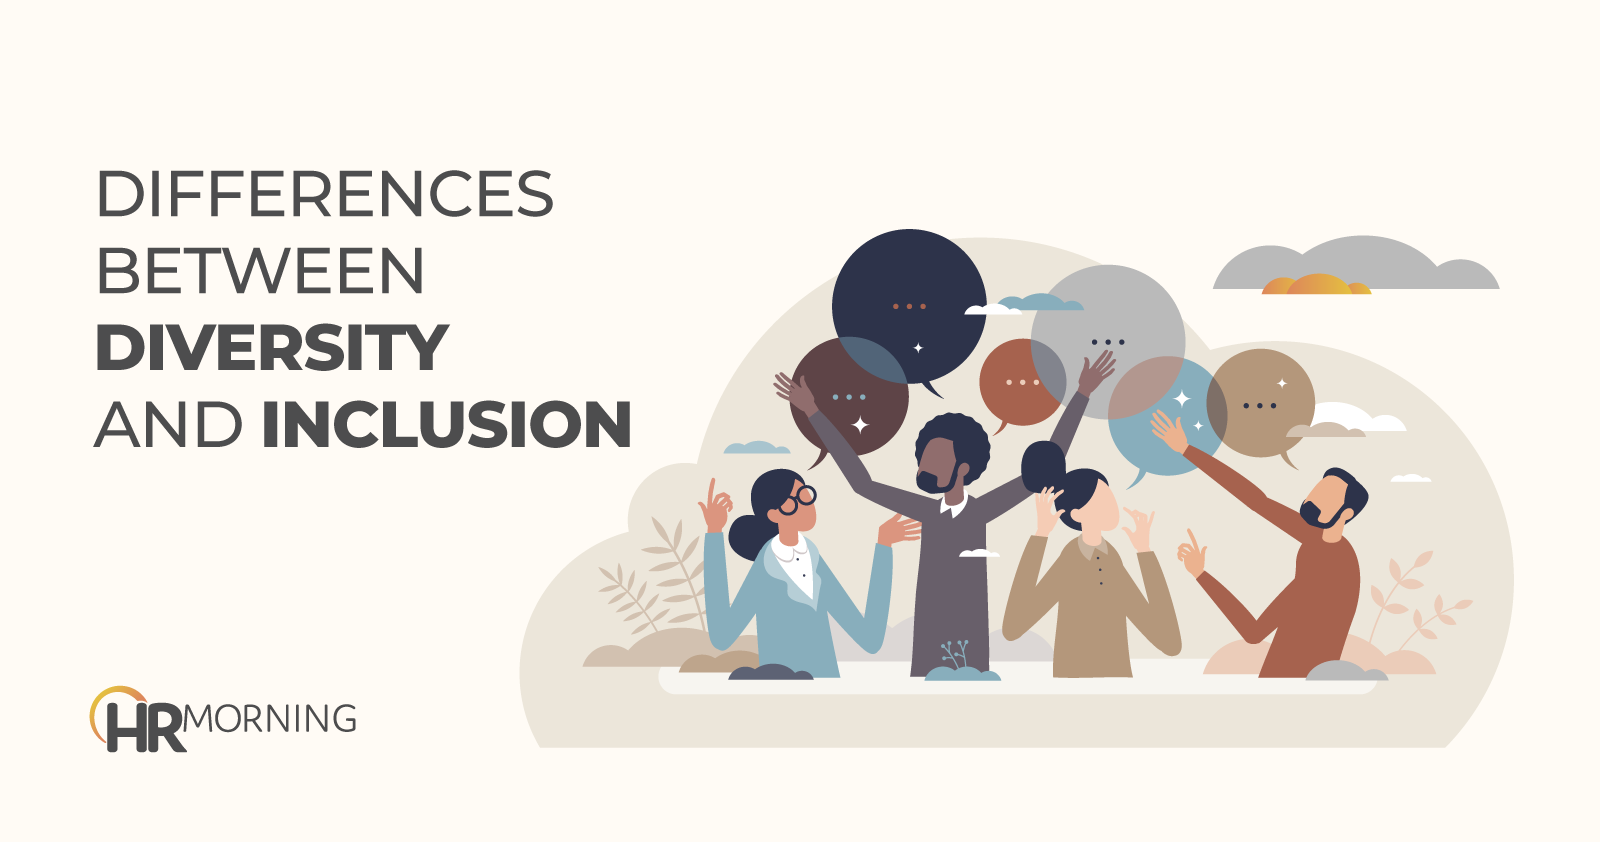 Differences between diversity and inclusion